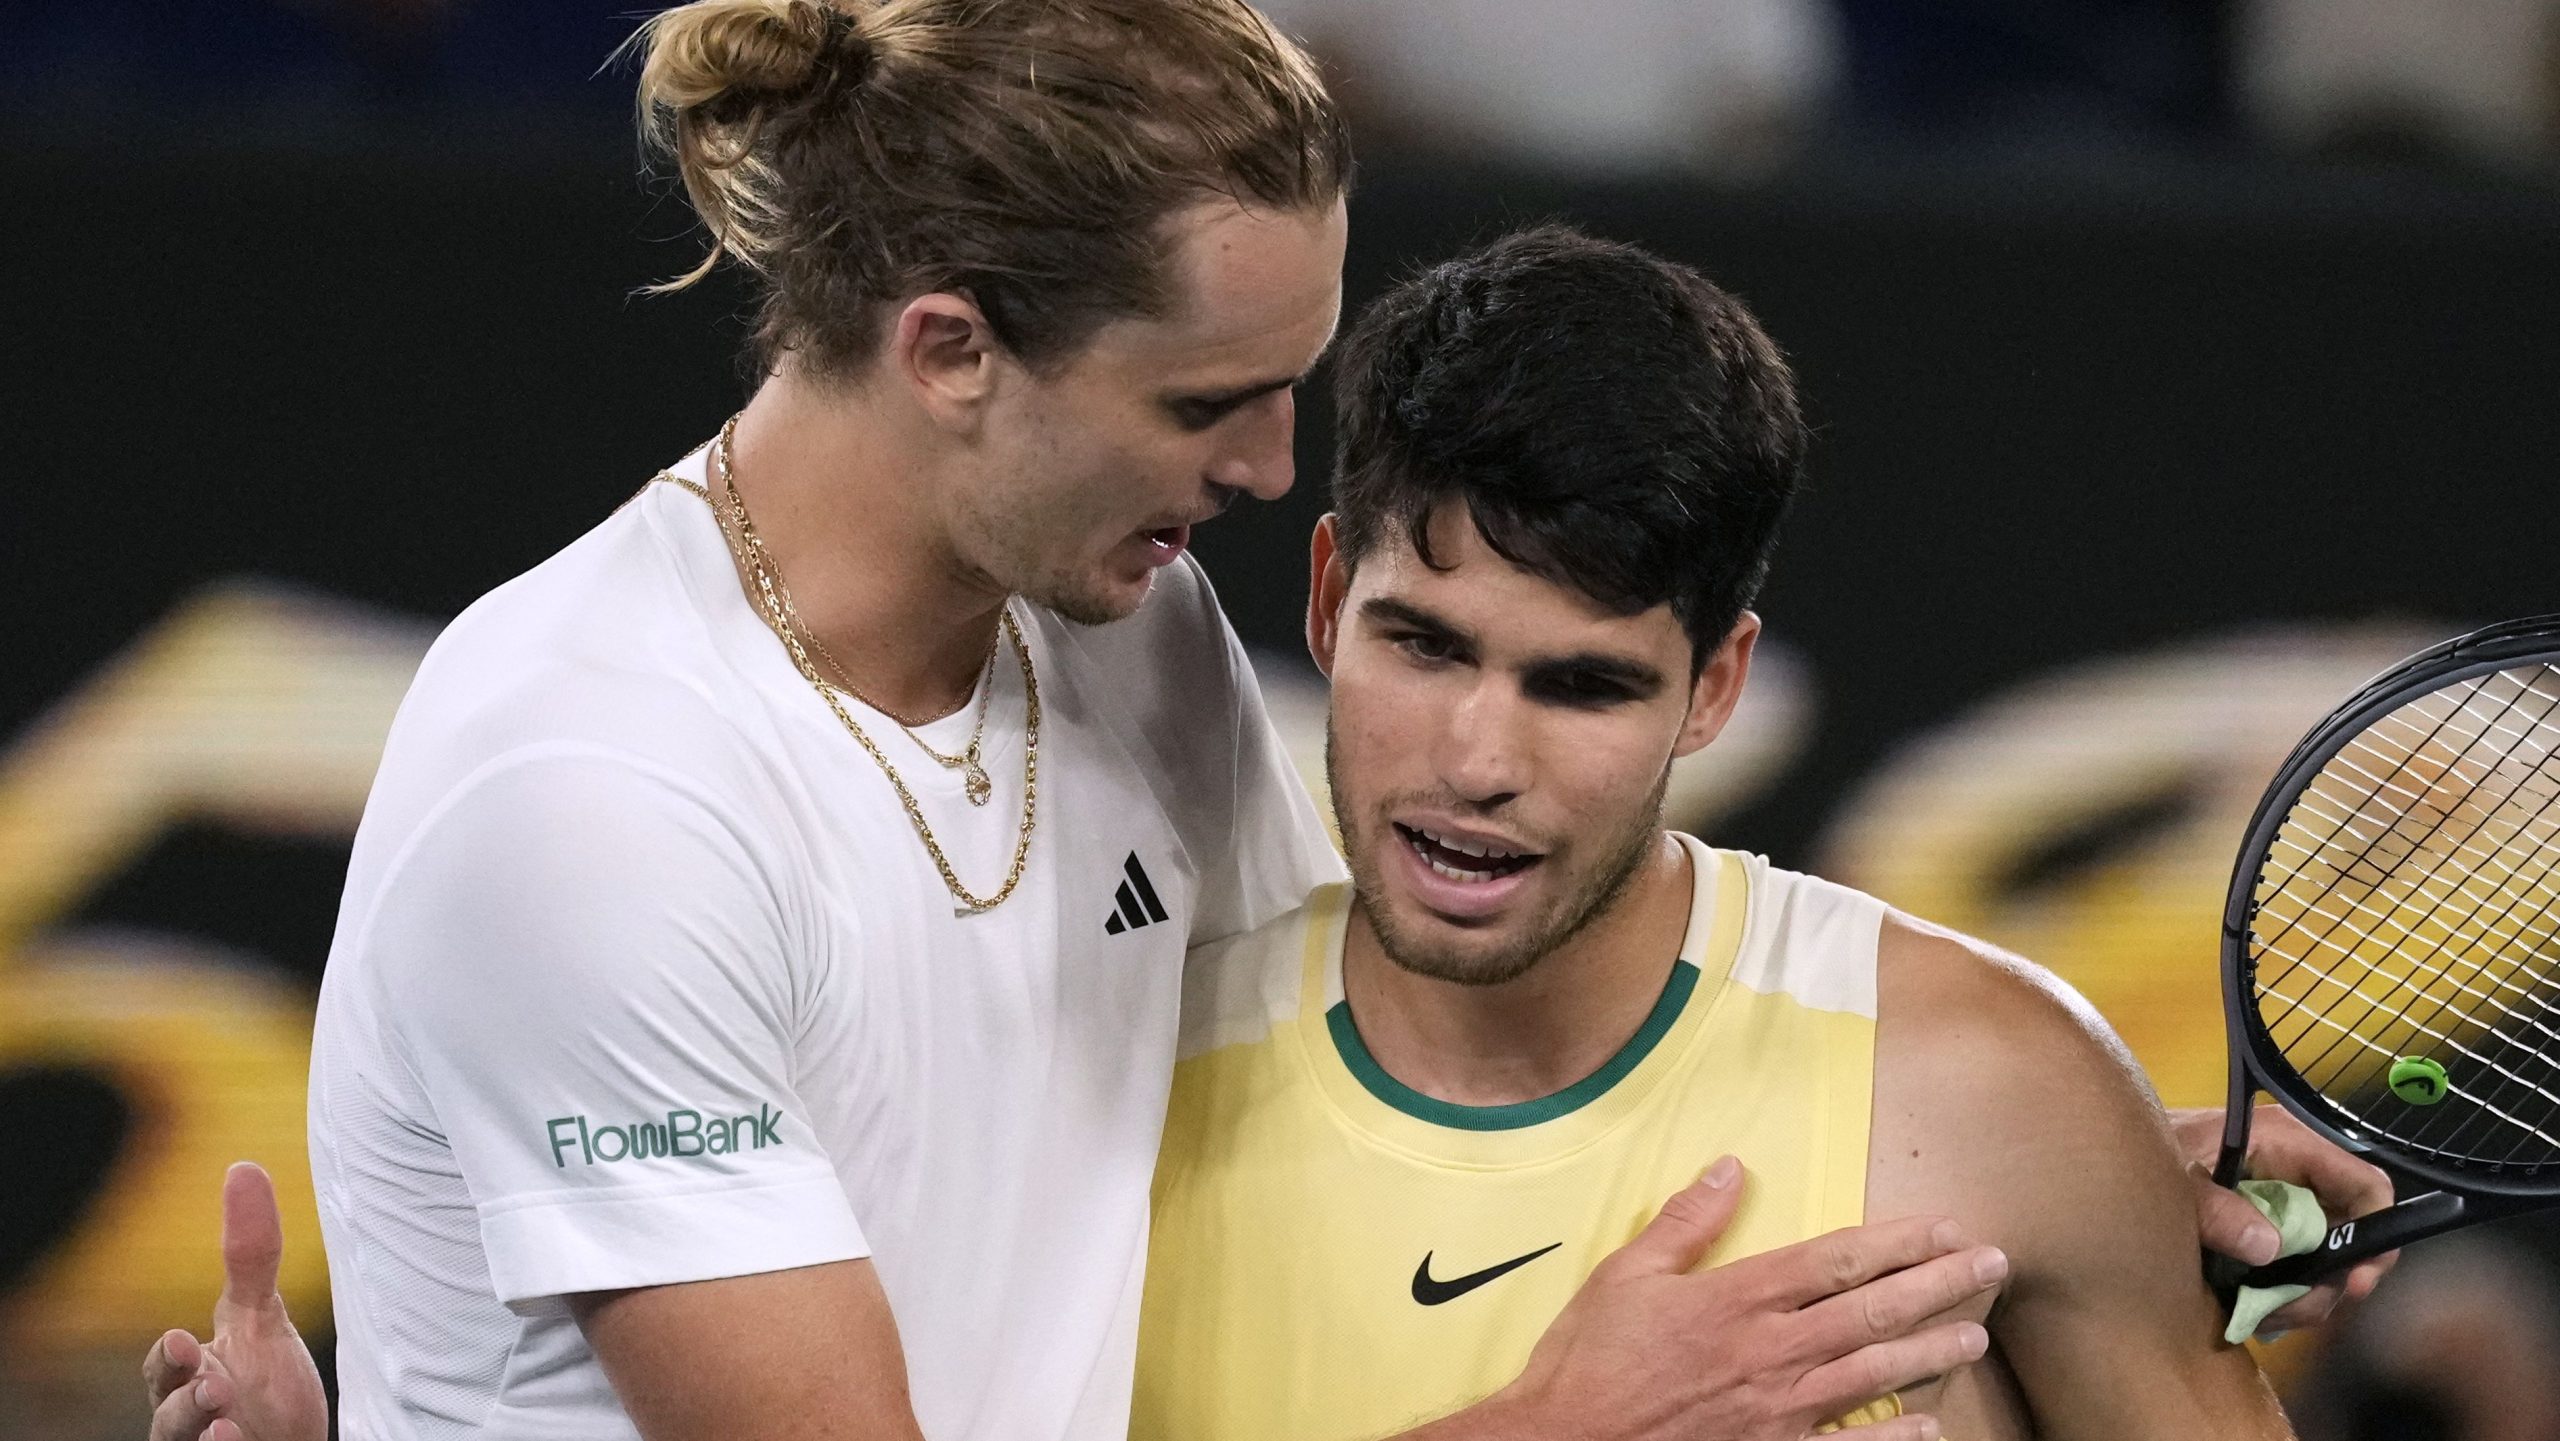 Alcaraz dumped out in stunning defeat to Zverev